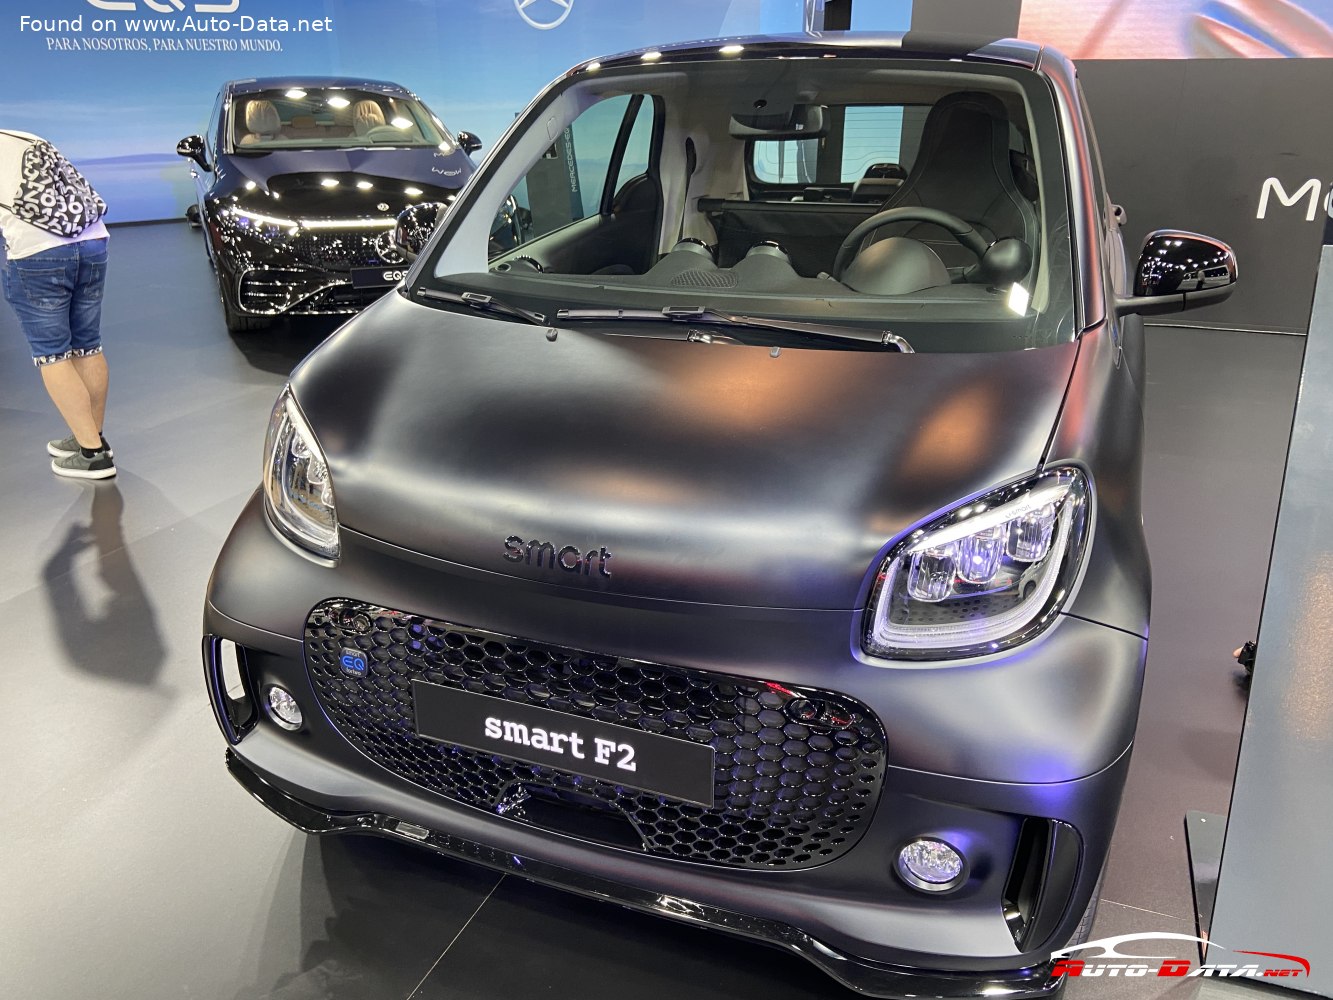 2020 Smart EQ fortwo (C453, facelift 2019) 17.2 kWh (82 Hp